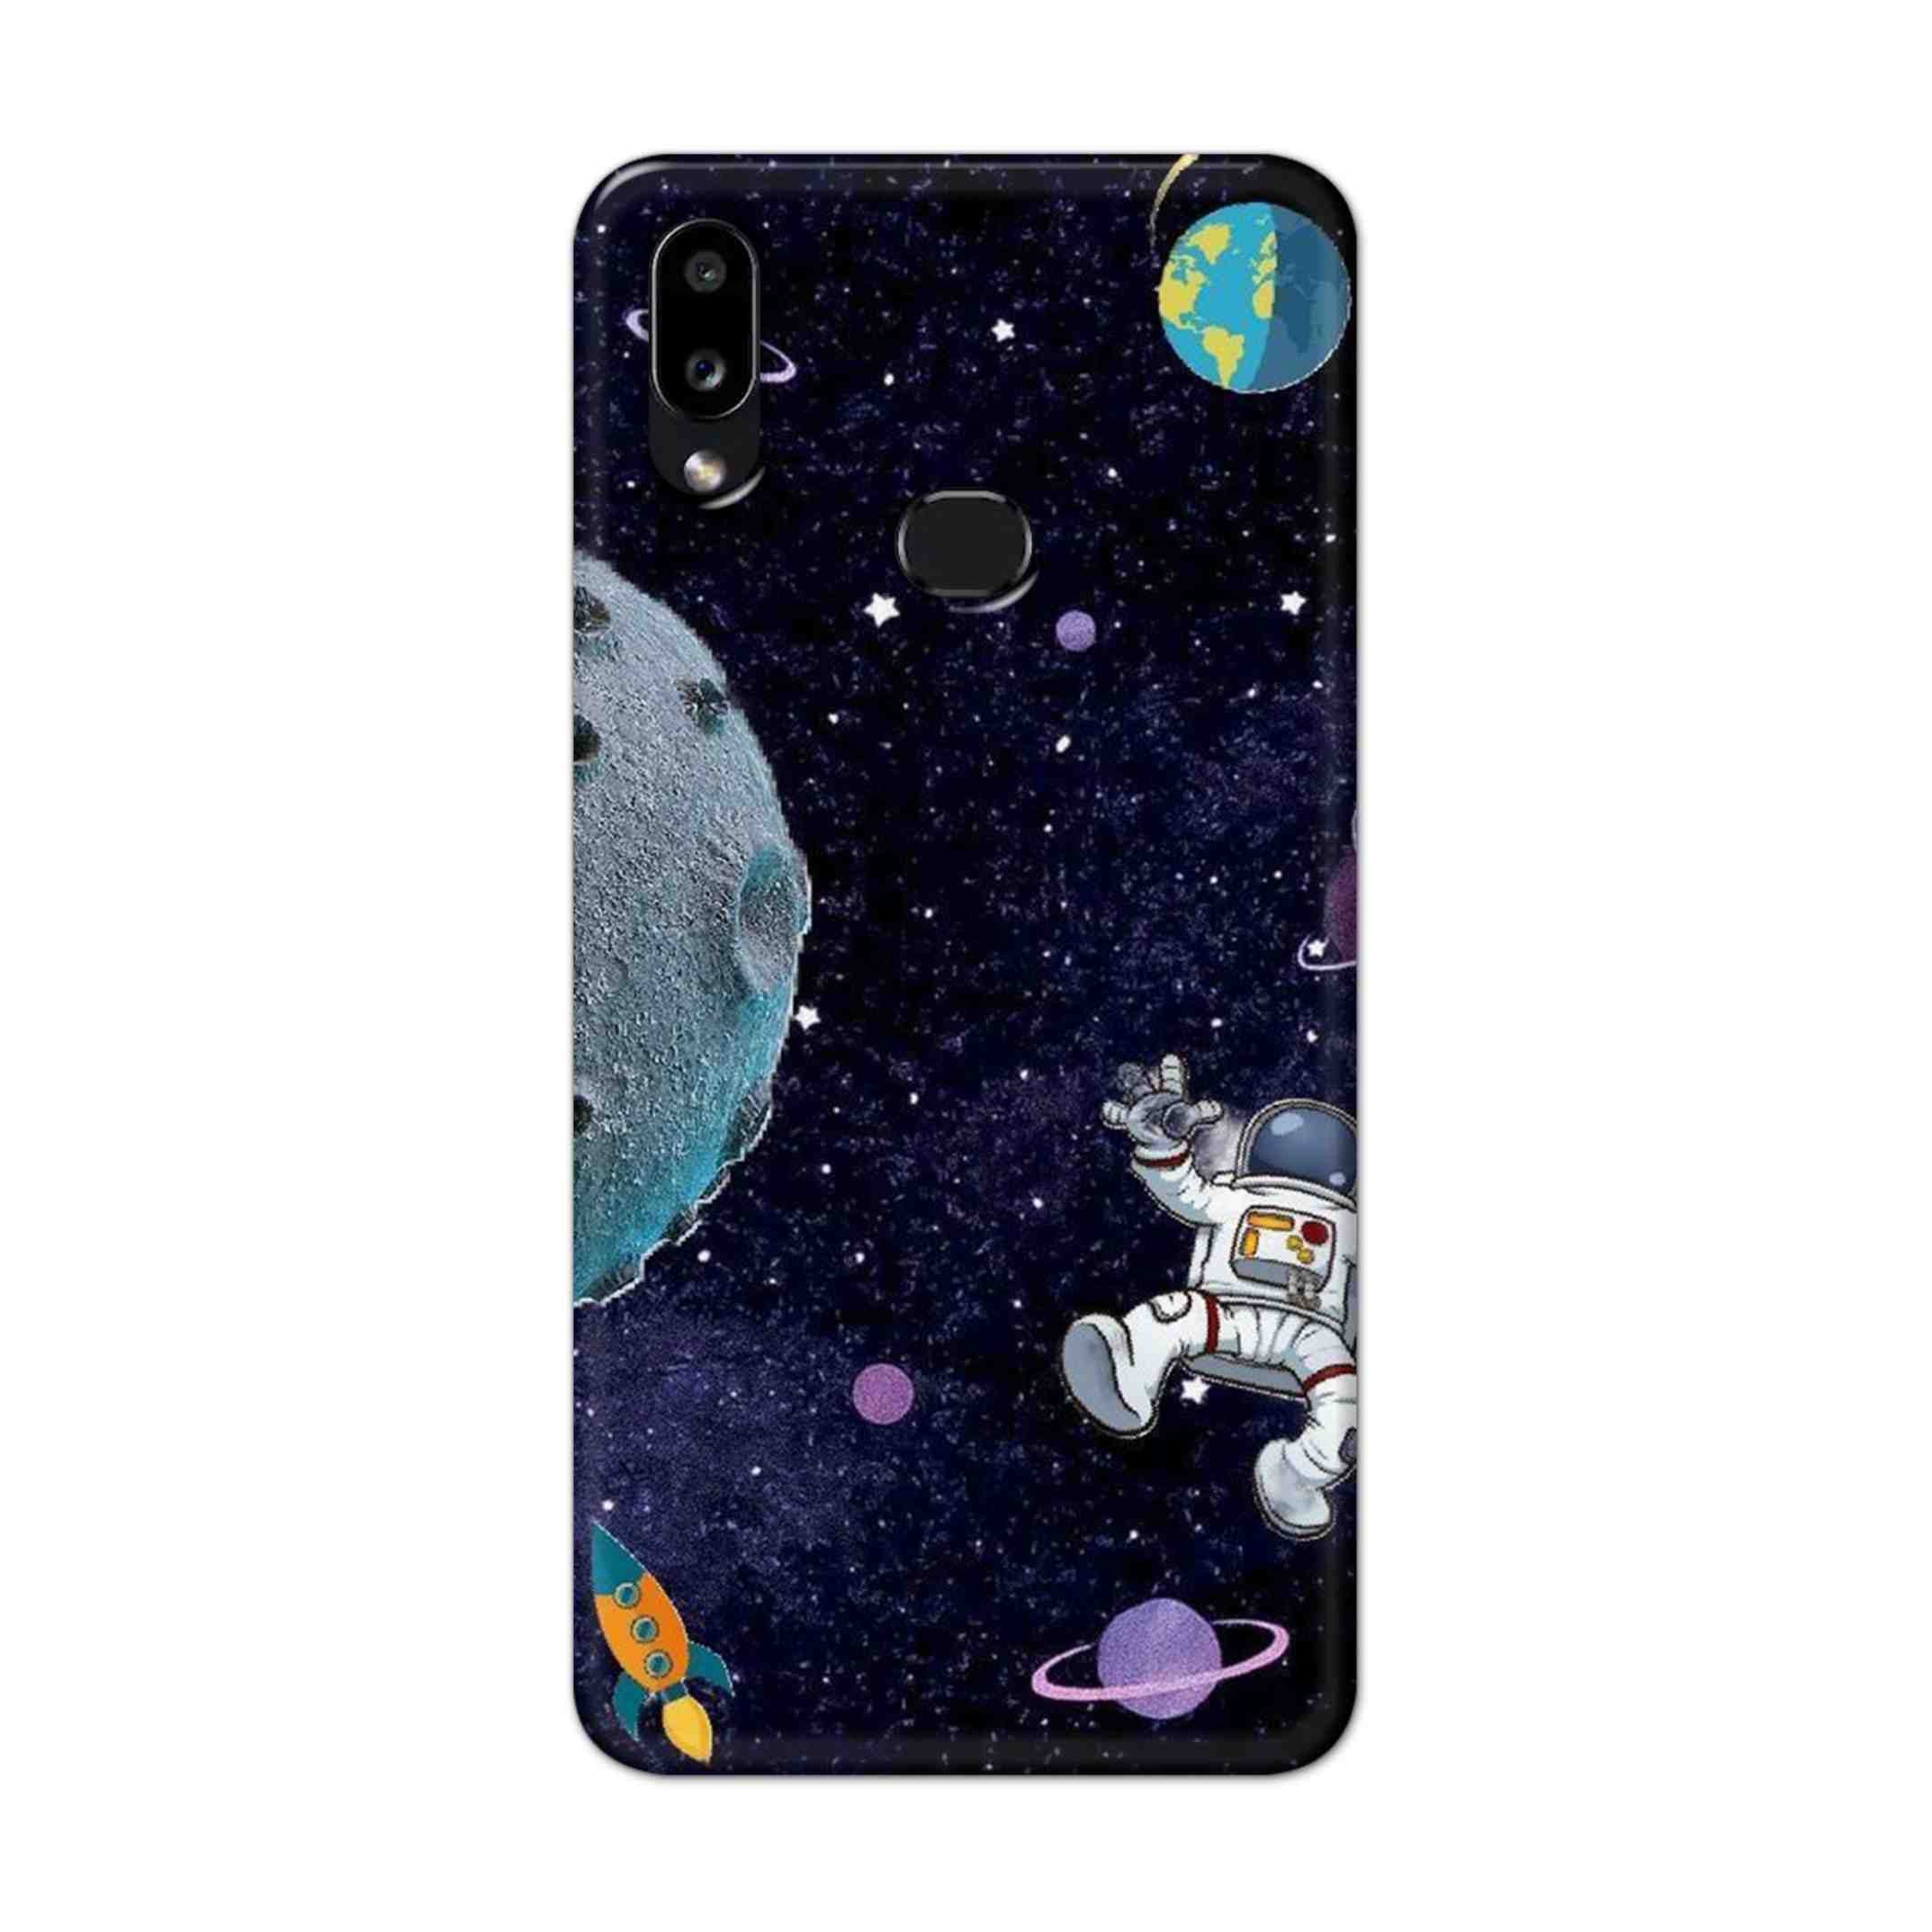 Buy Space Hard Back Mobile Phone Case Cover For Samsung Galaxy M01s Online